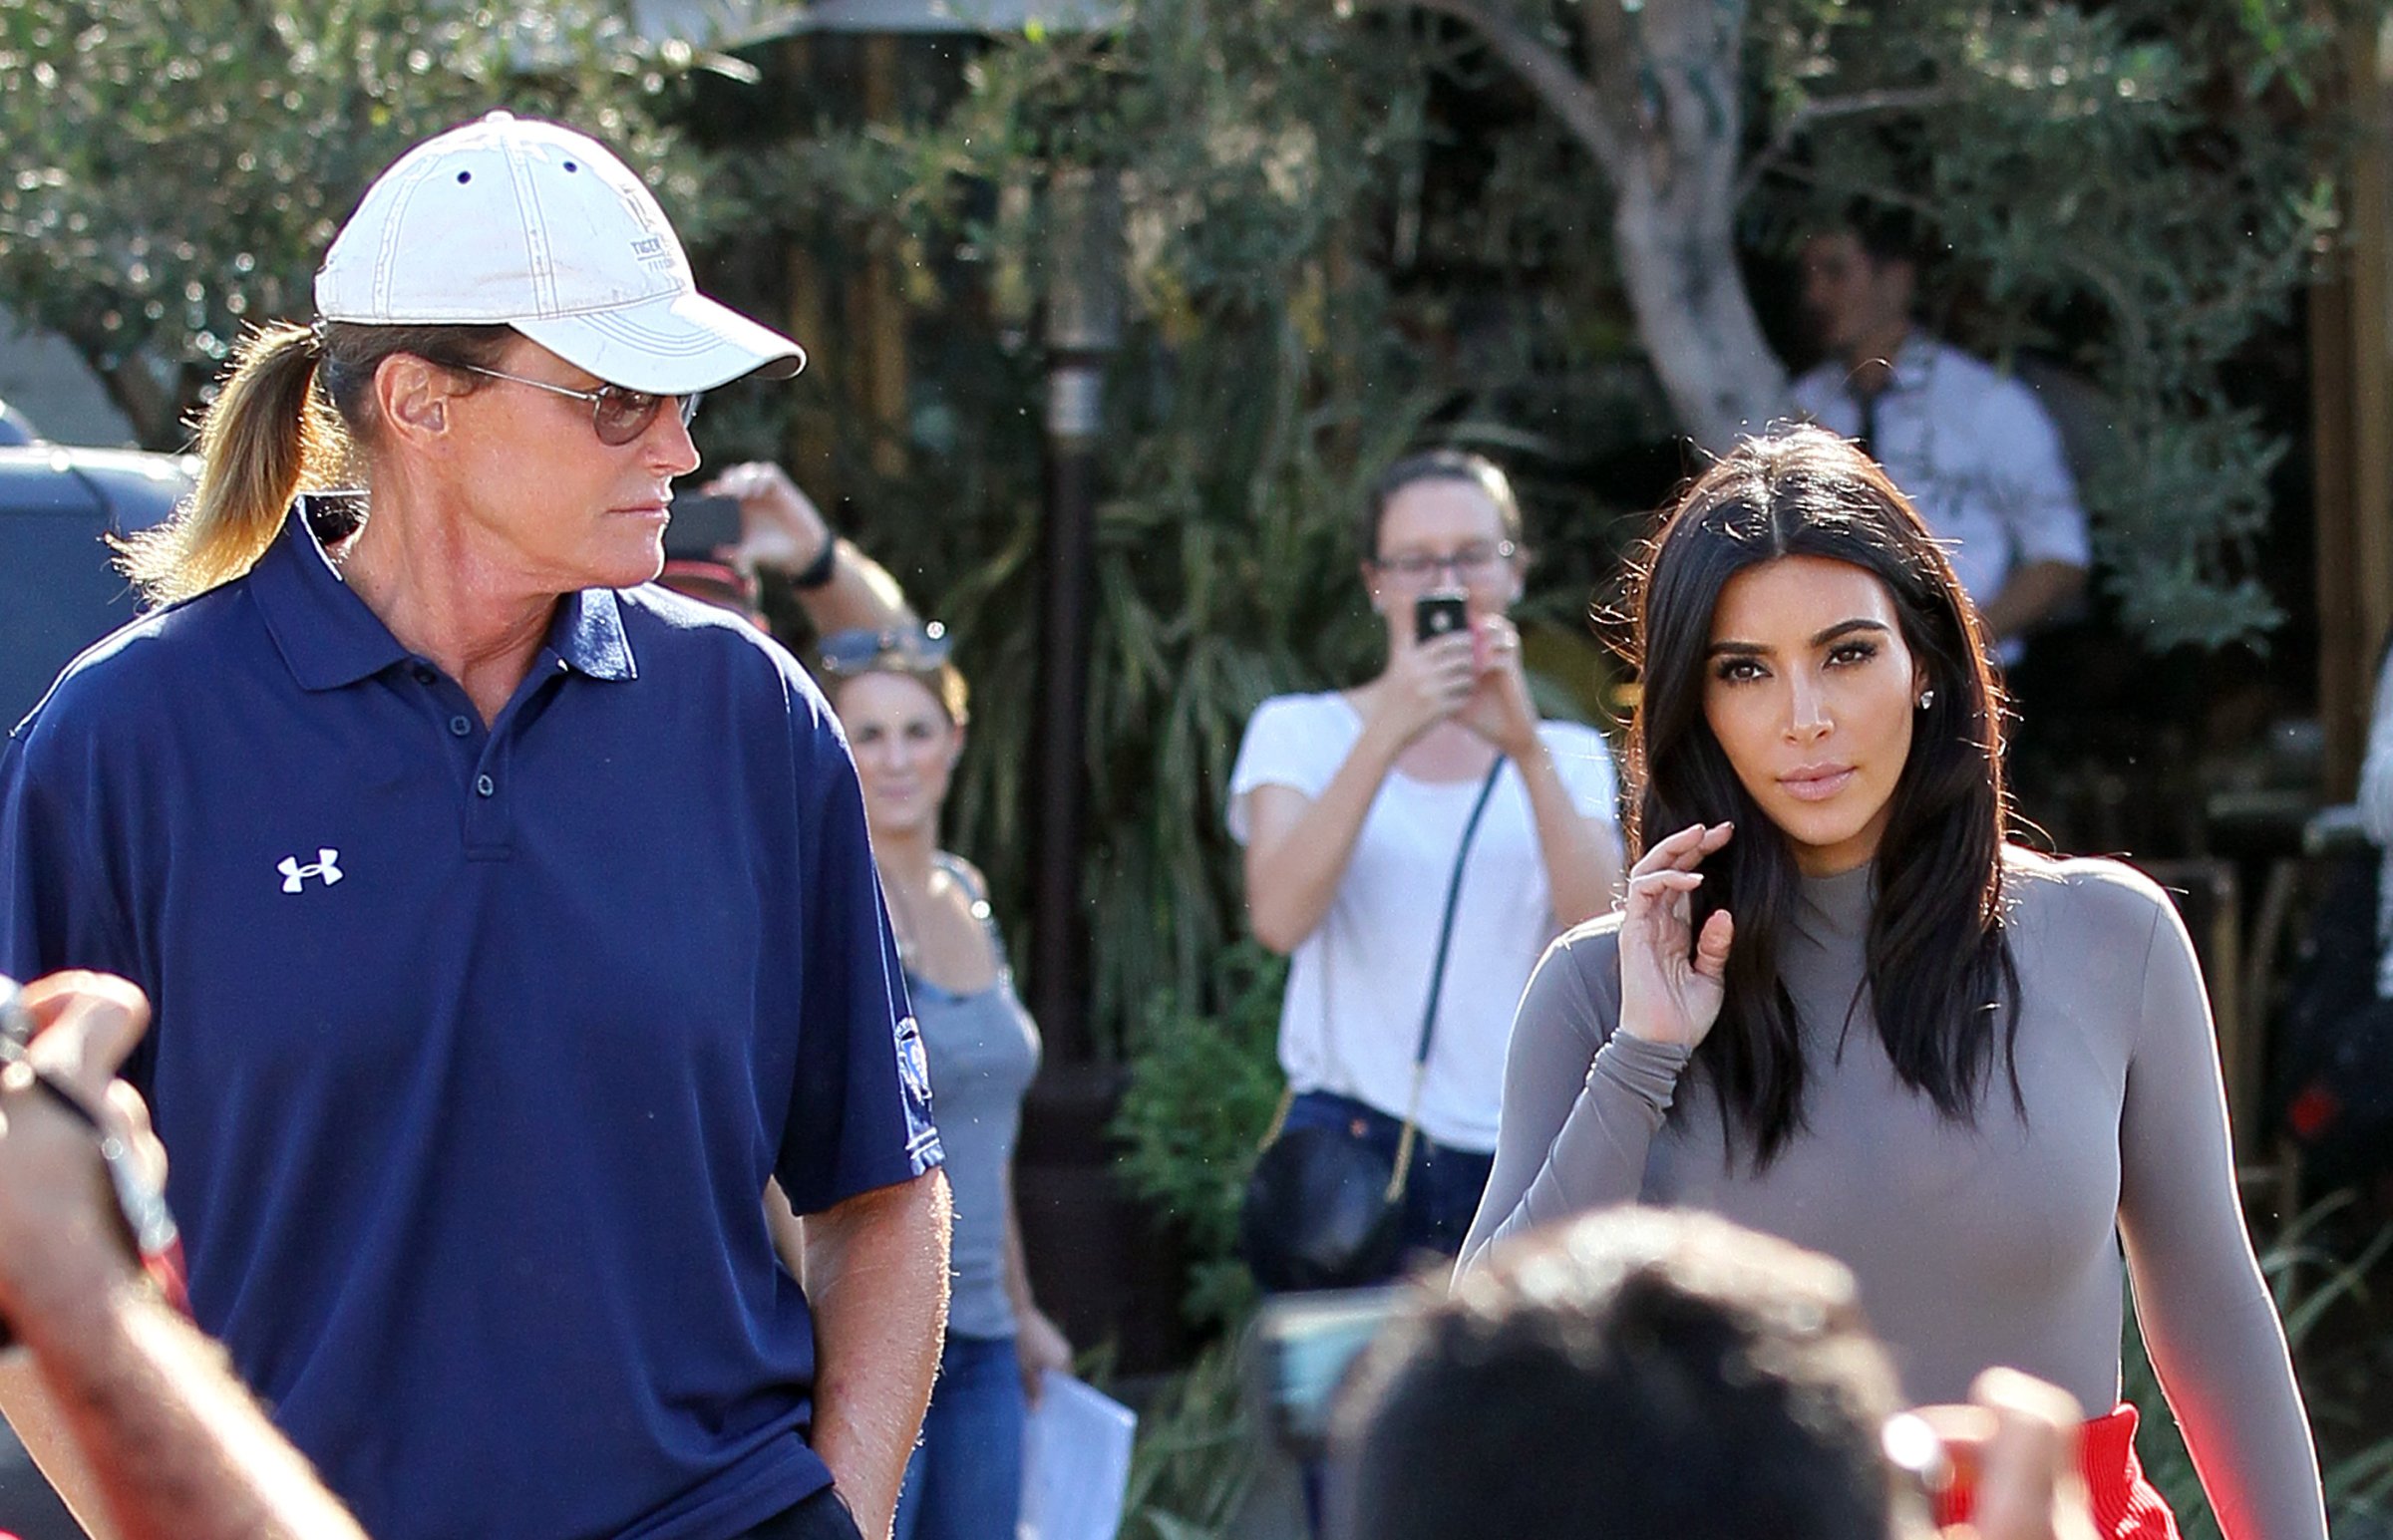 Bruce Jenner and Kim Kardashian are seen filming their reality show in Los Angeles on Oct. 20, 2014.